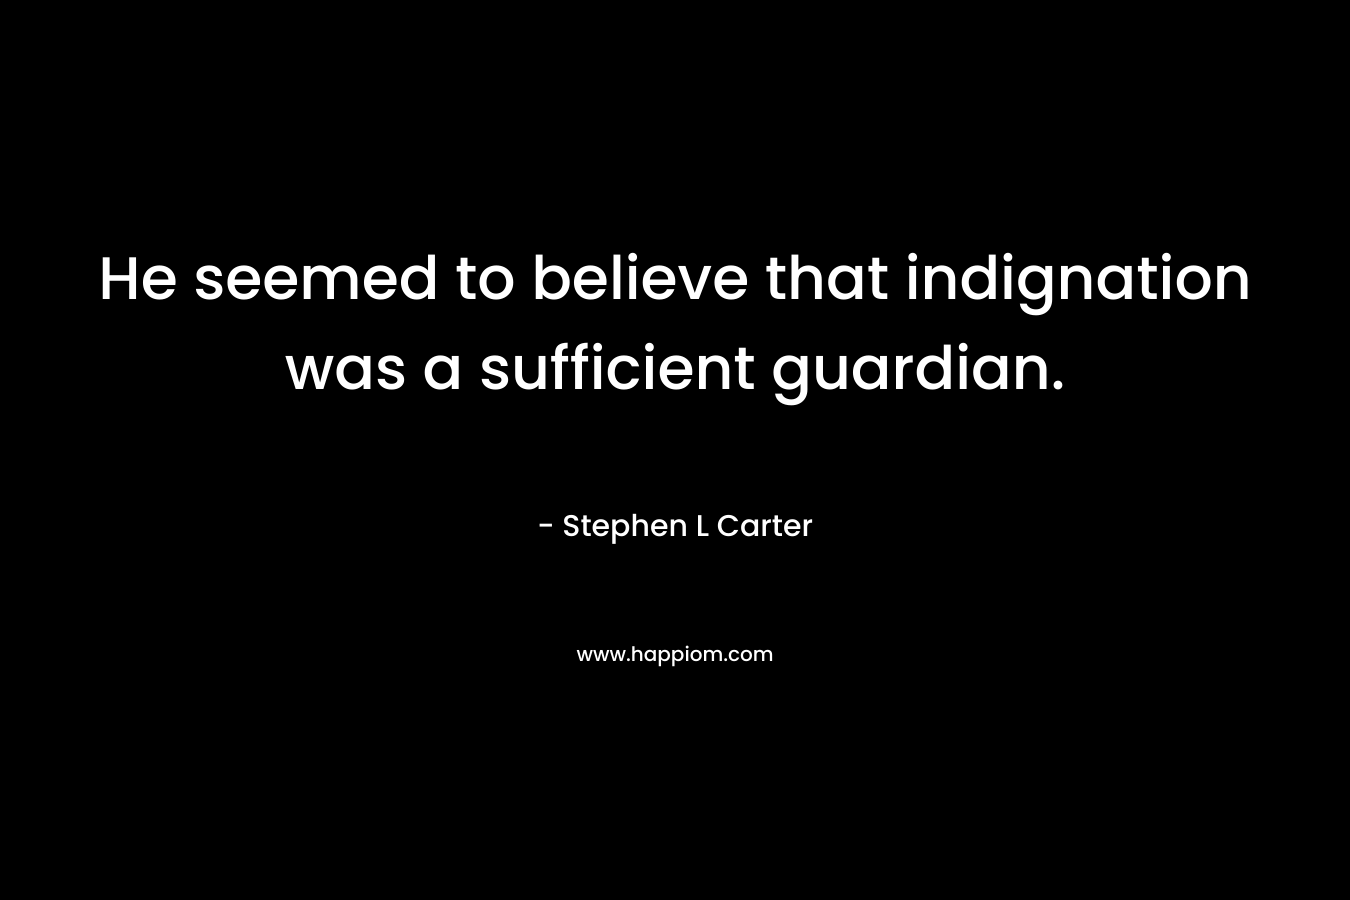 He seemed to believe that indignation was a sufficient guardian.